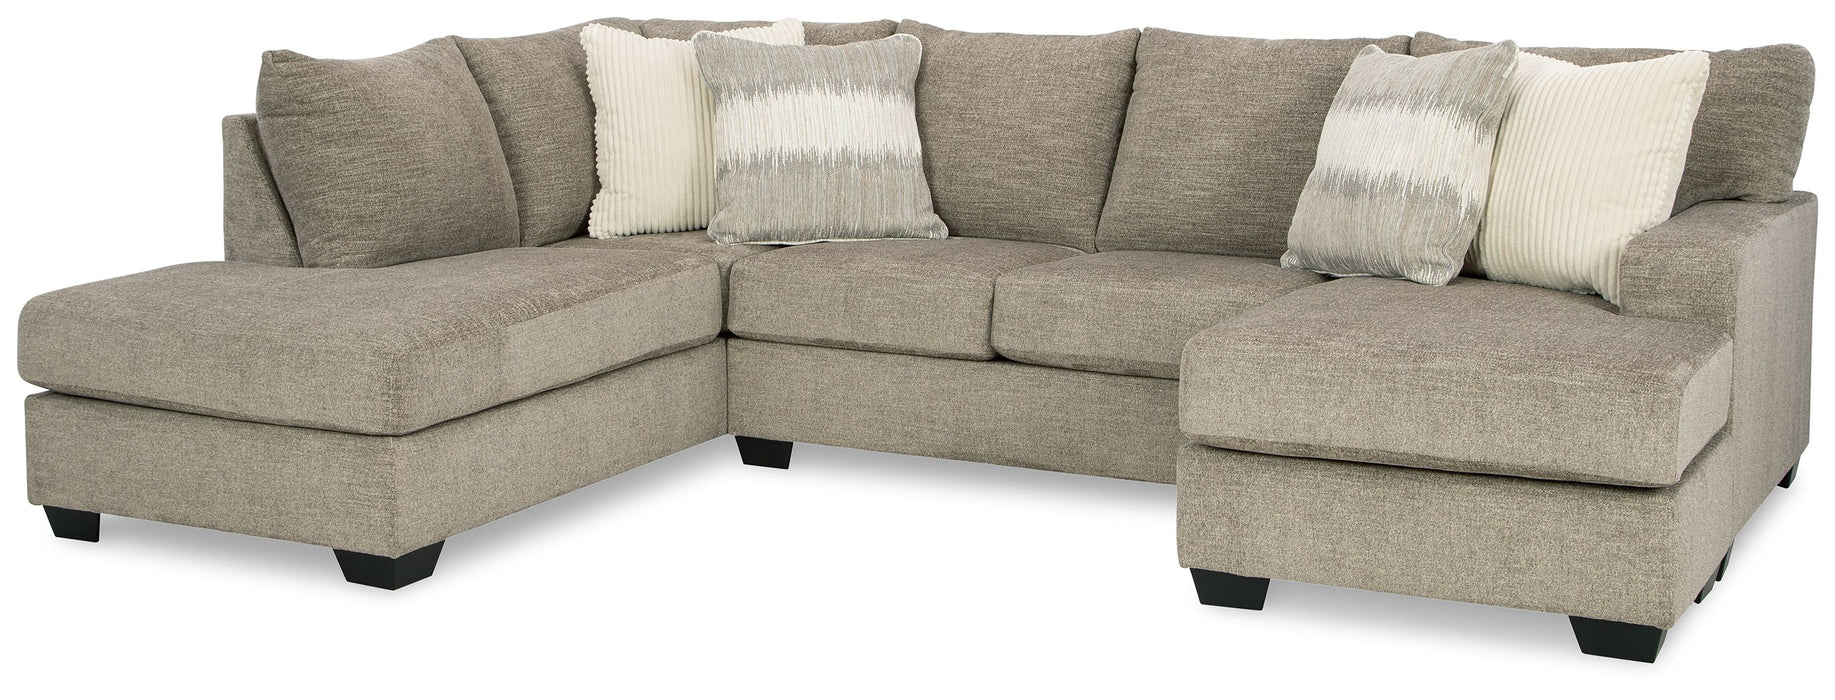 Creswell - Sectional